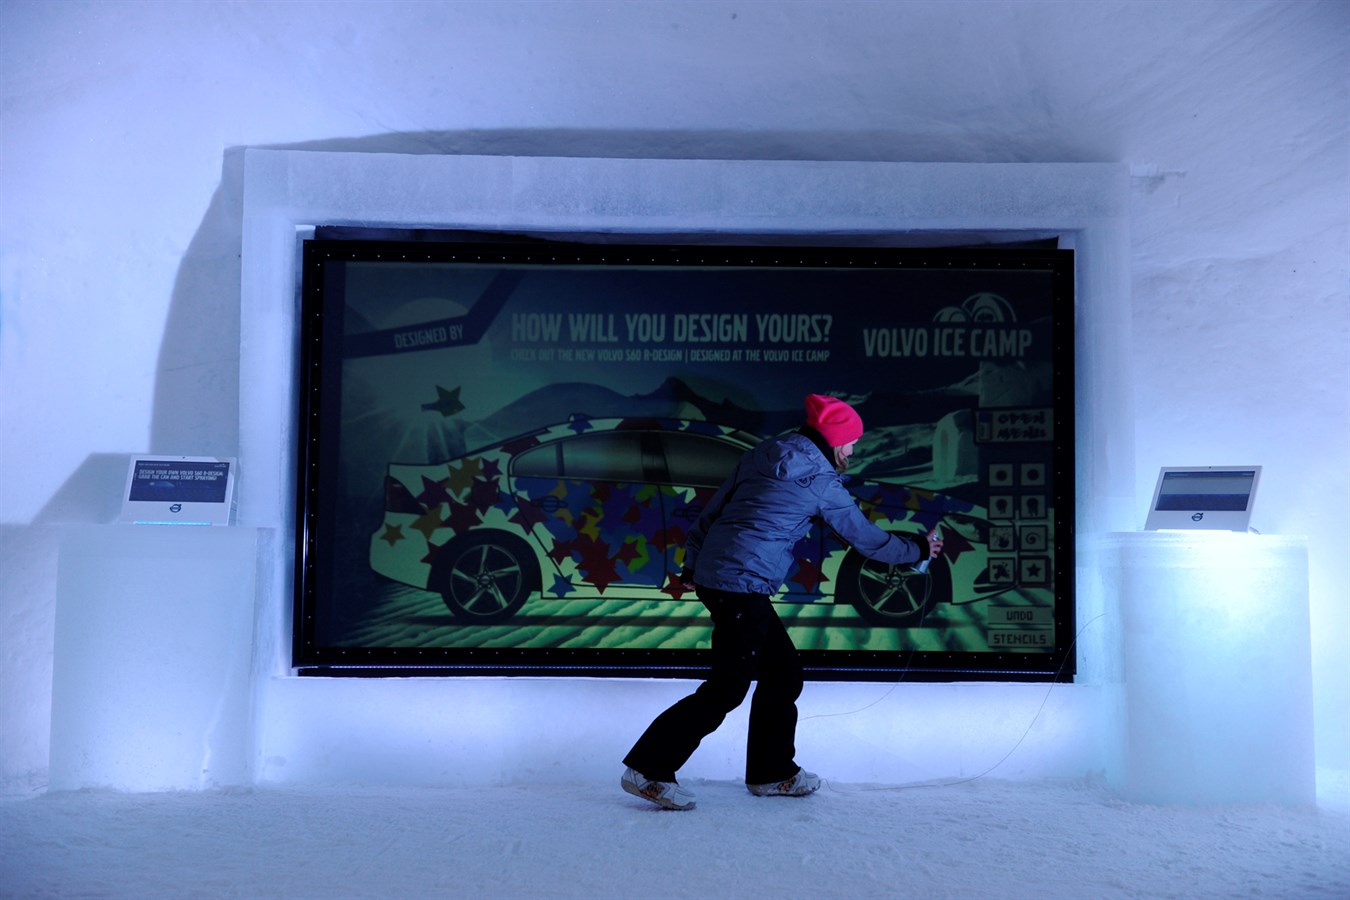 Volvo ICE CAMP interior, screen where you can design your Volvo S60